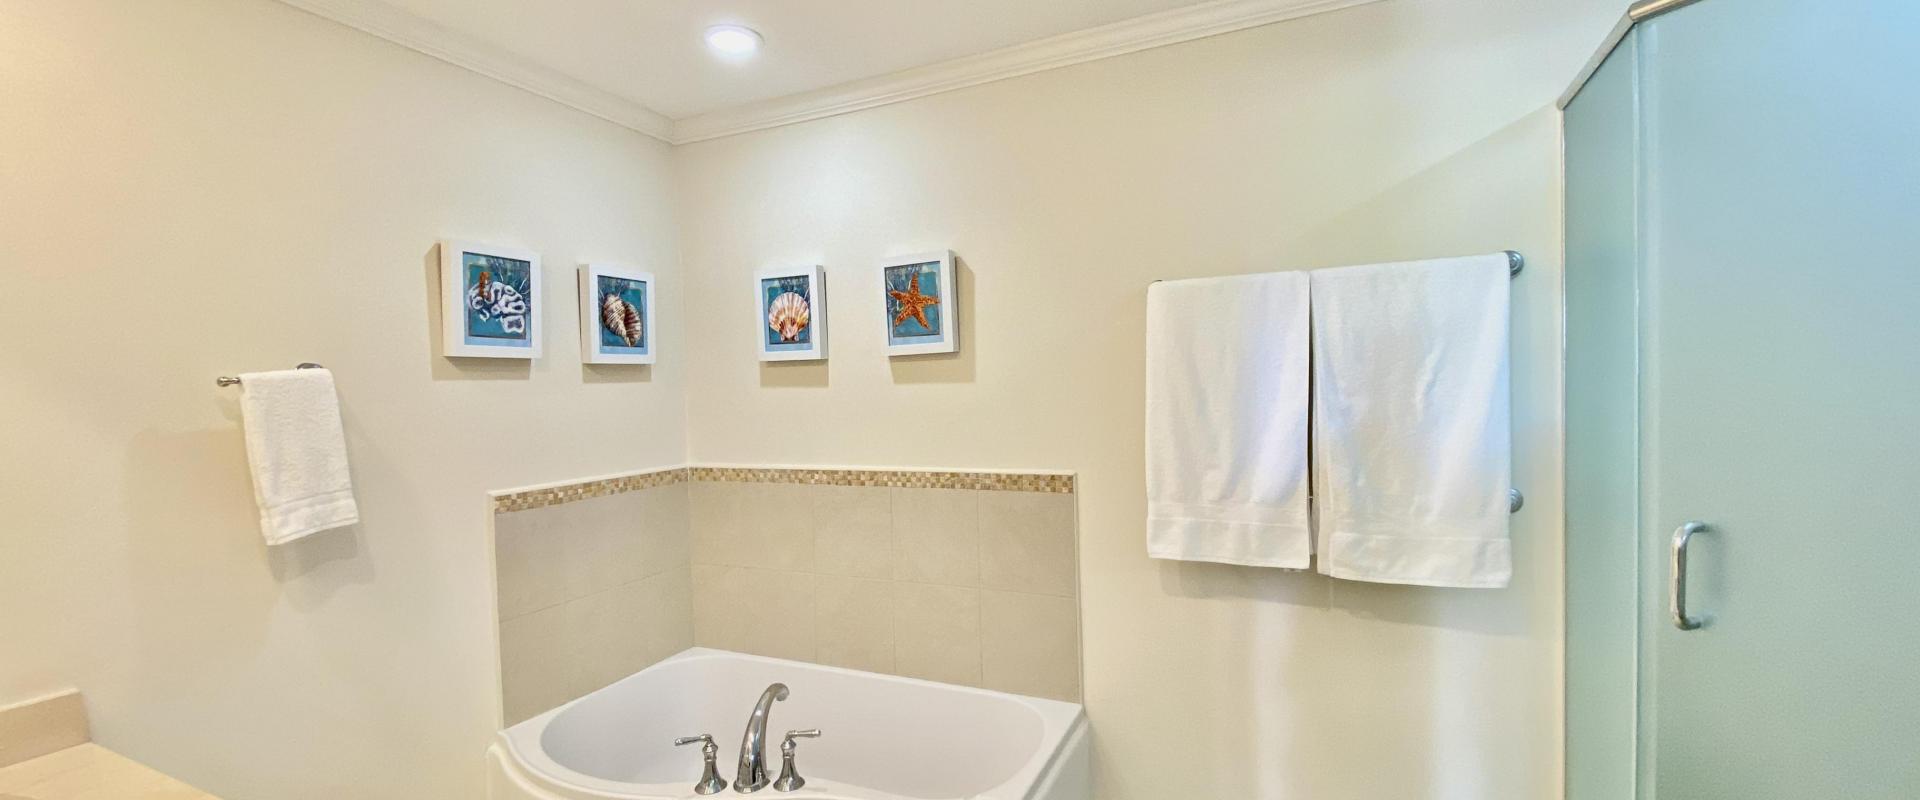 Palm Beach 211 Barbados Beachfront Vacation Condo Rental Primary Bathroom with Shower and Tub